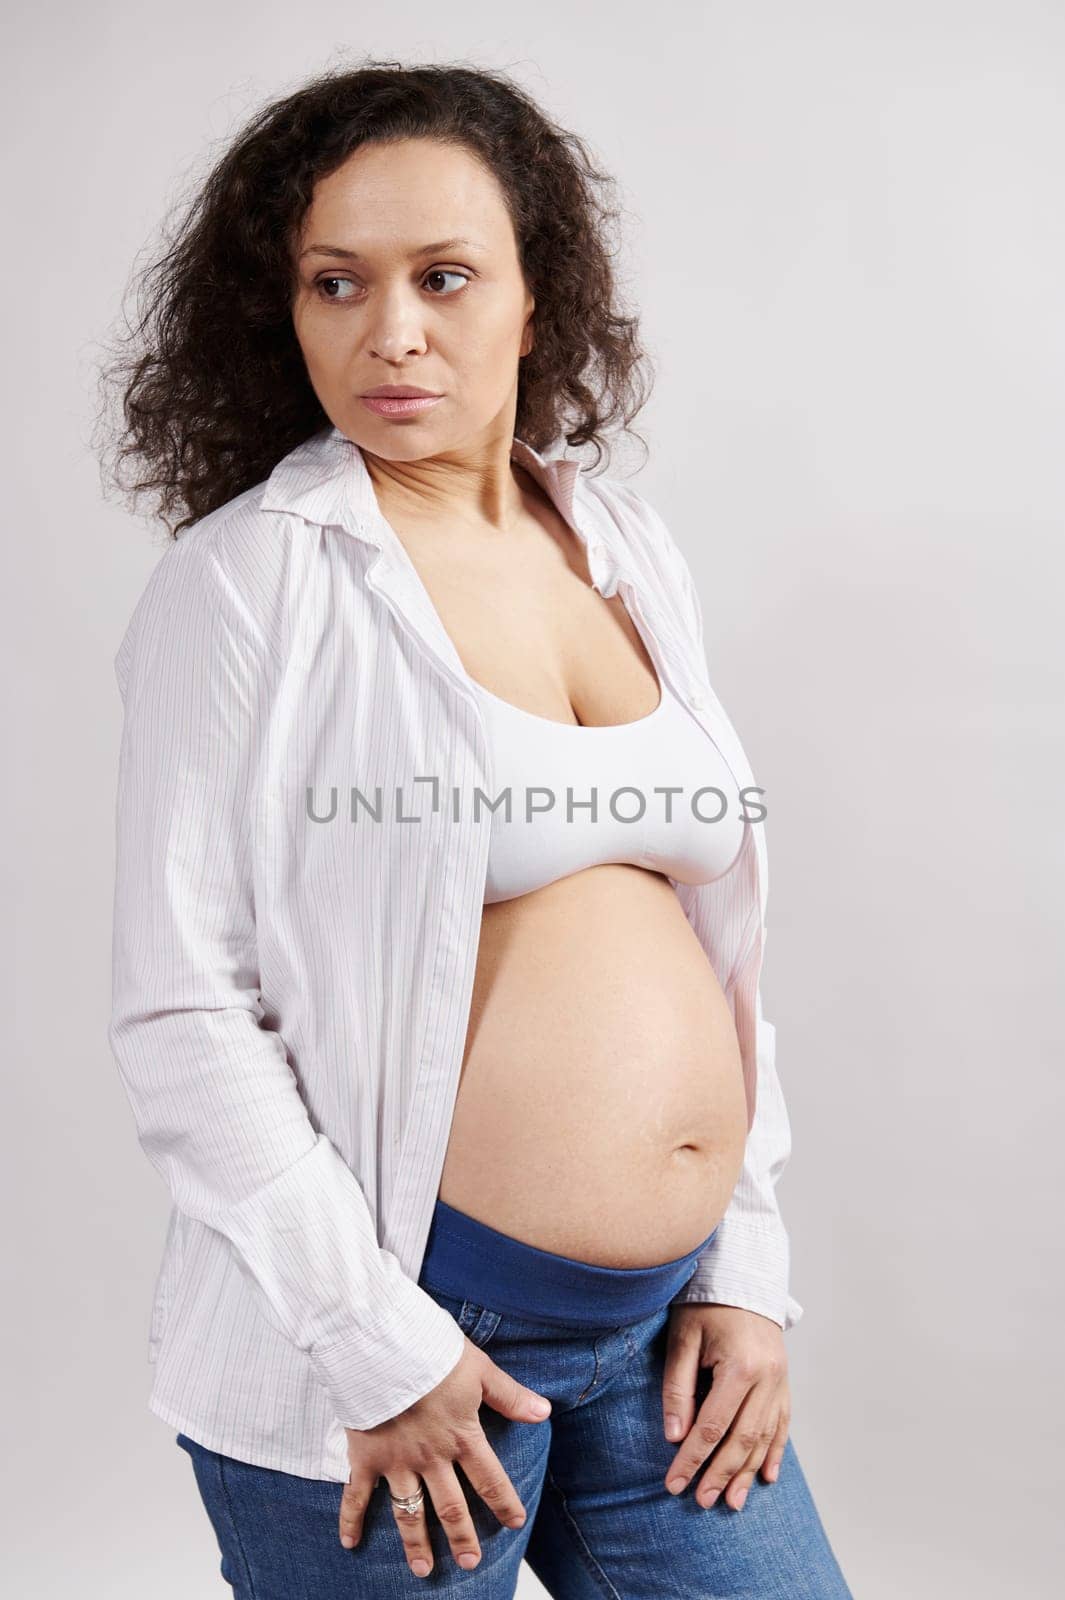 Confident serene pregnant woman, wearing unbuttoned white shirt and blue denim, looking aside, isolated white background by artgf